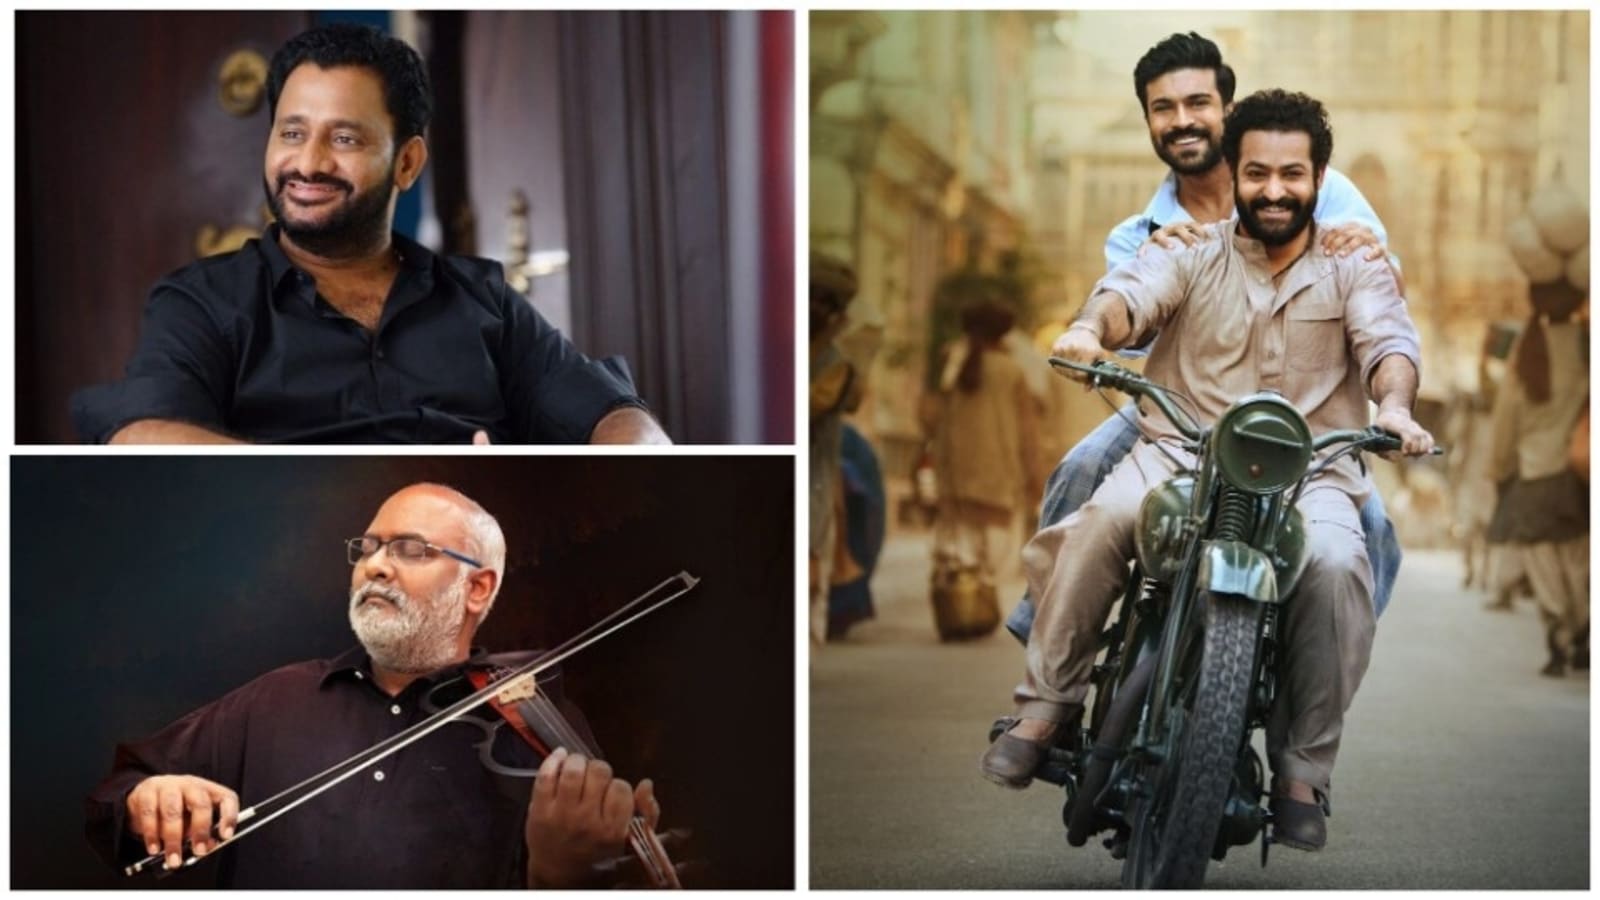 RRR composer Keeravani says Resul Pookutty has spoiled film for him: ‘Can’t see Ram and Bheem anymore’